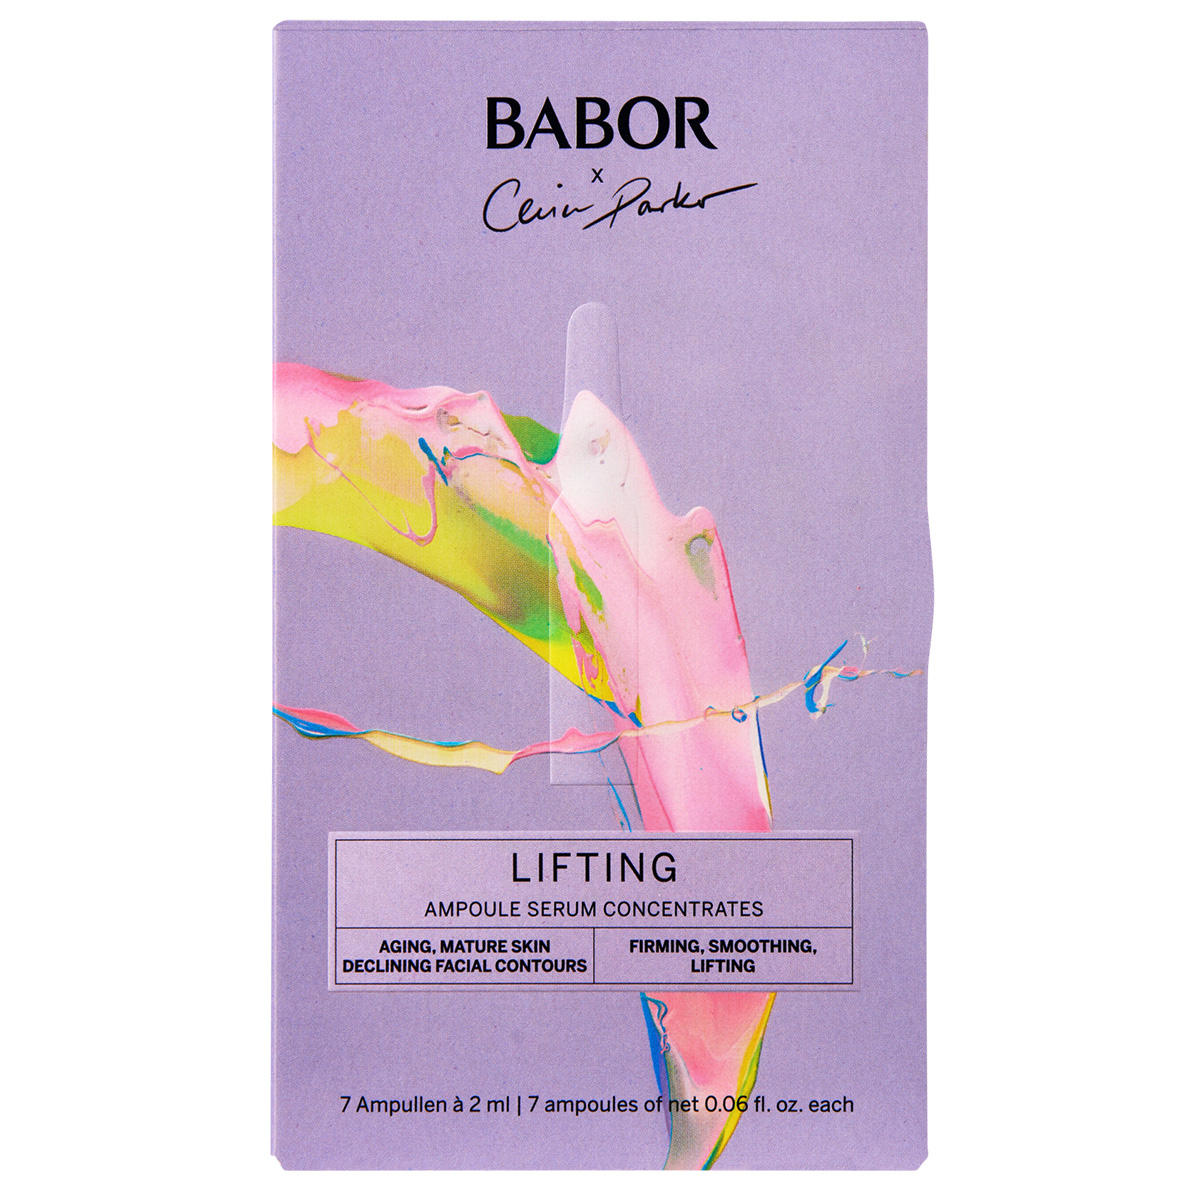 BABOR AMPOULE CONCENTRATES Lifting Ampul Beperkte Editie 7 x 2 ml - 1